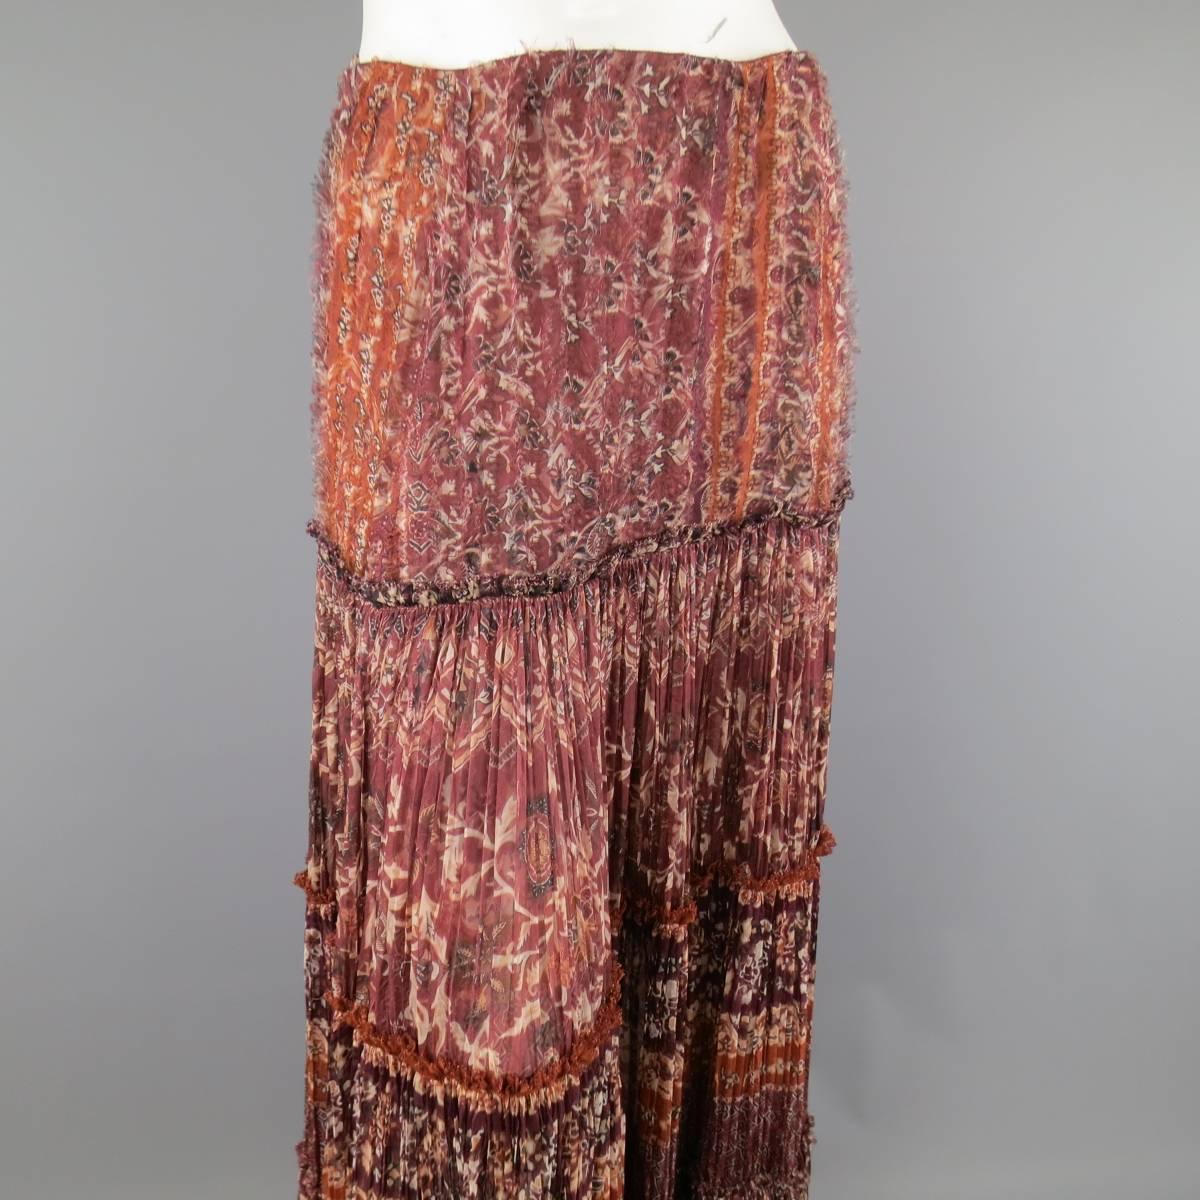 OSCAR DE LA RENTA Spring Summer 2006 maxi skirt in a burgundy and orange textured floral print silk featuring panels of wrinkle pleats, frayed texture, and ruffle trim. Made in USA.
 
Excellent Pre-Owned Condition.
Marked: 8
 
Measurements:
 
Waist: